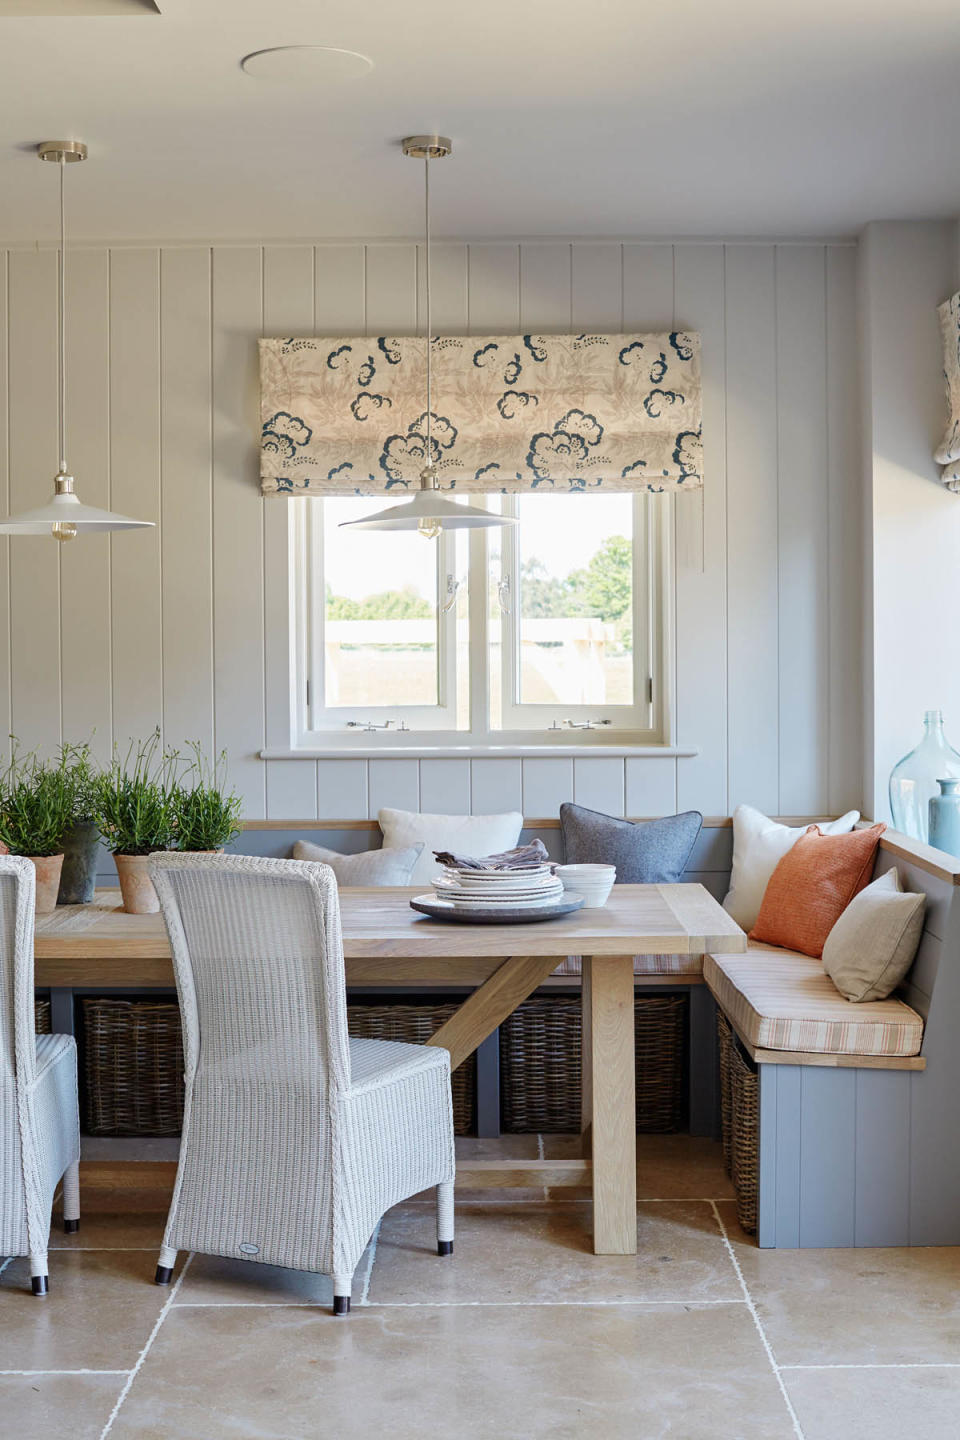 <p> Even very small spaces can often accommodate banquette seating, fitted into a corner or even on one side of an island, to create a cozy, compact dining spot, while in living areas.&#xA0; </p> <p> This design by Sims-Hilditch shows how to create a small dining space elegantly. </p>